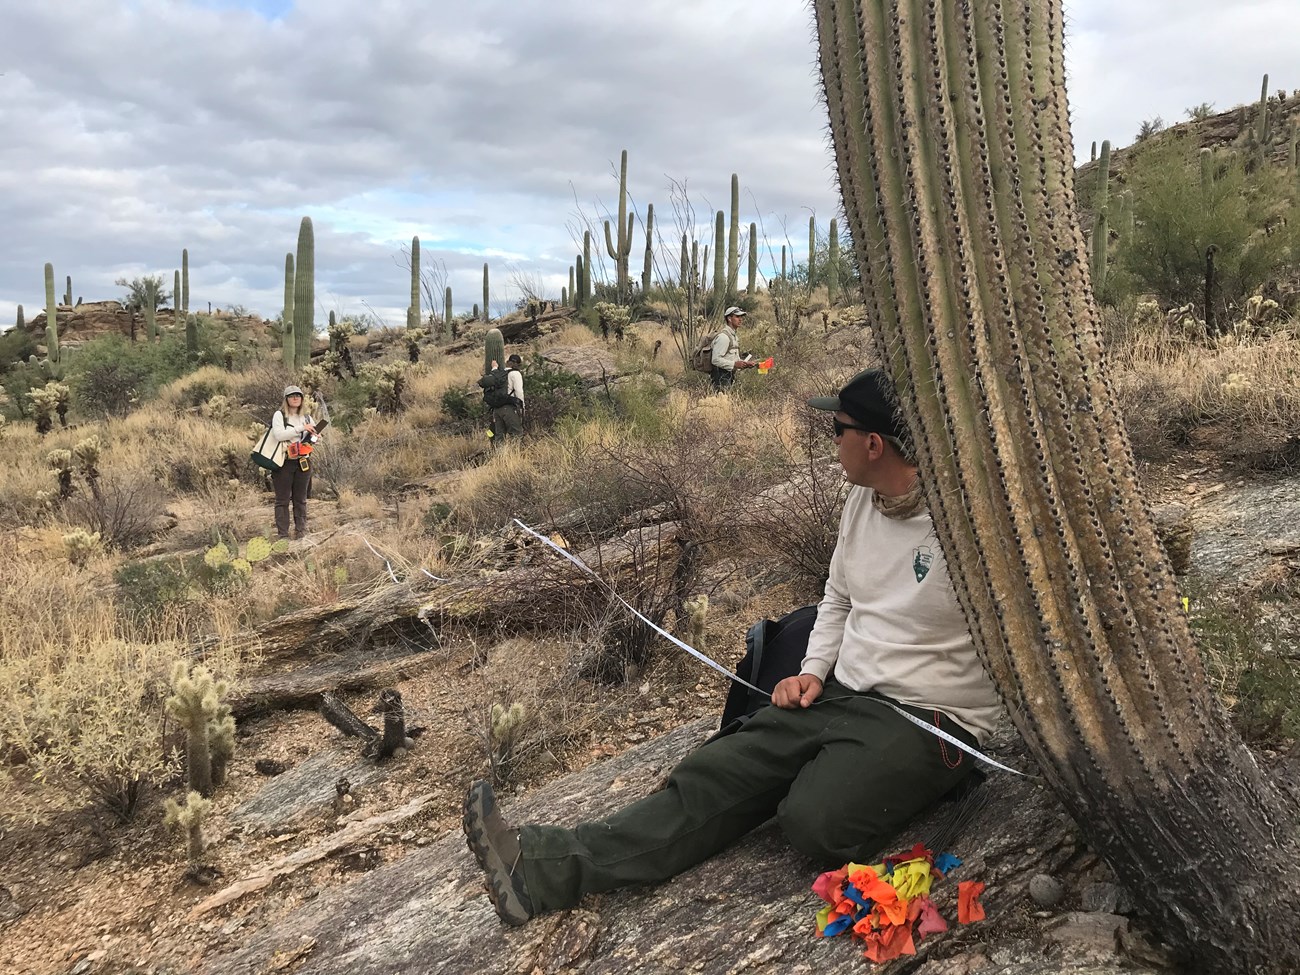 Crew members helping each other measure their distance from a saguaro